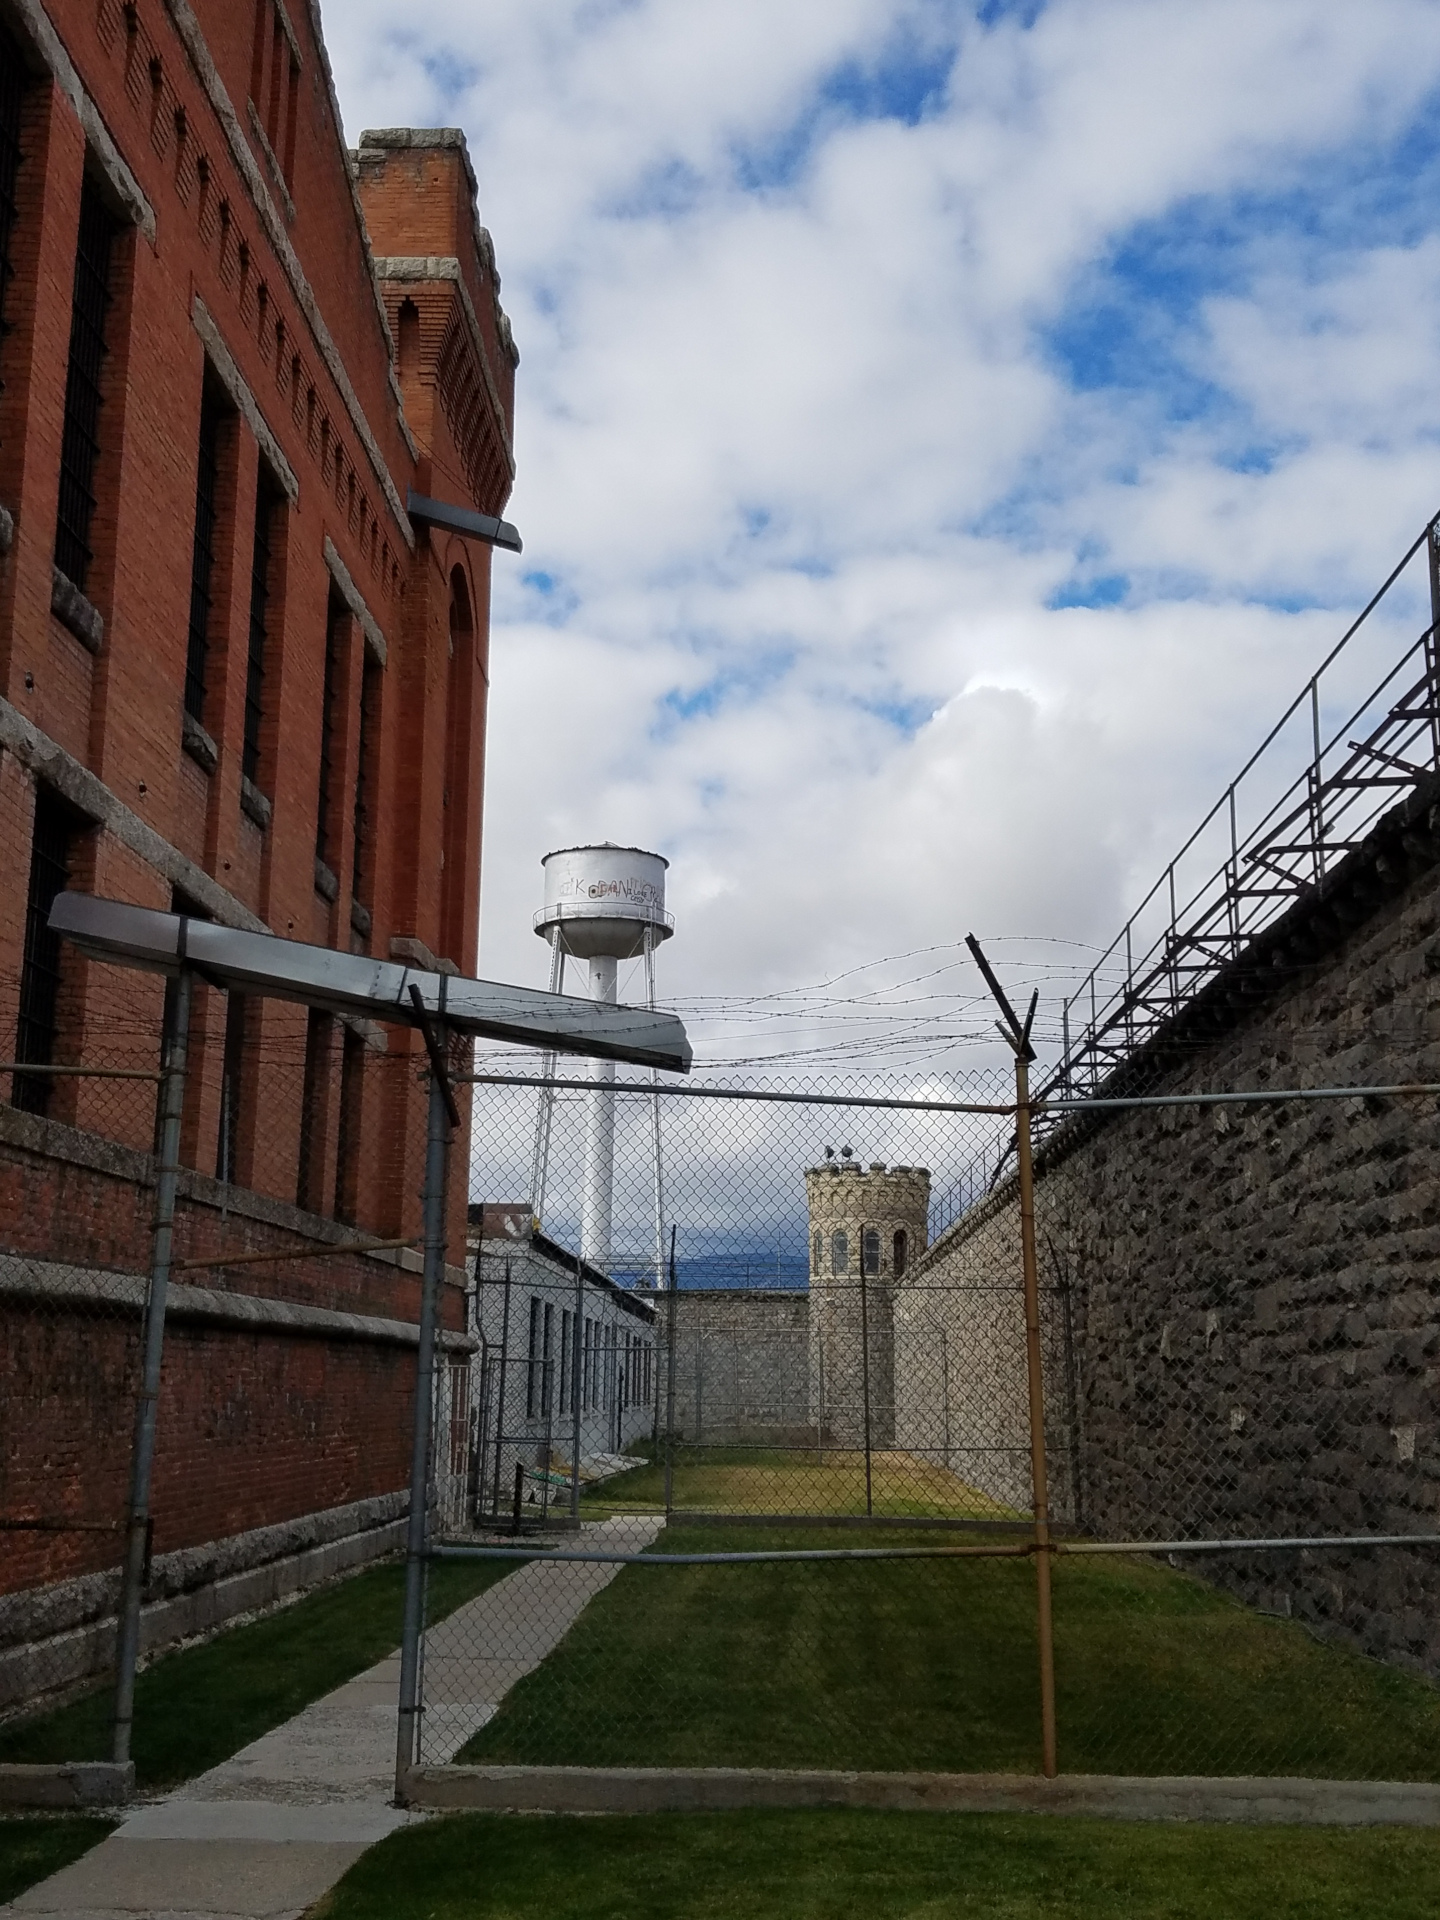 The Wall of the Prison